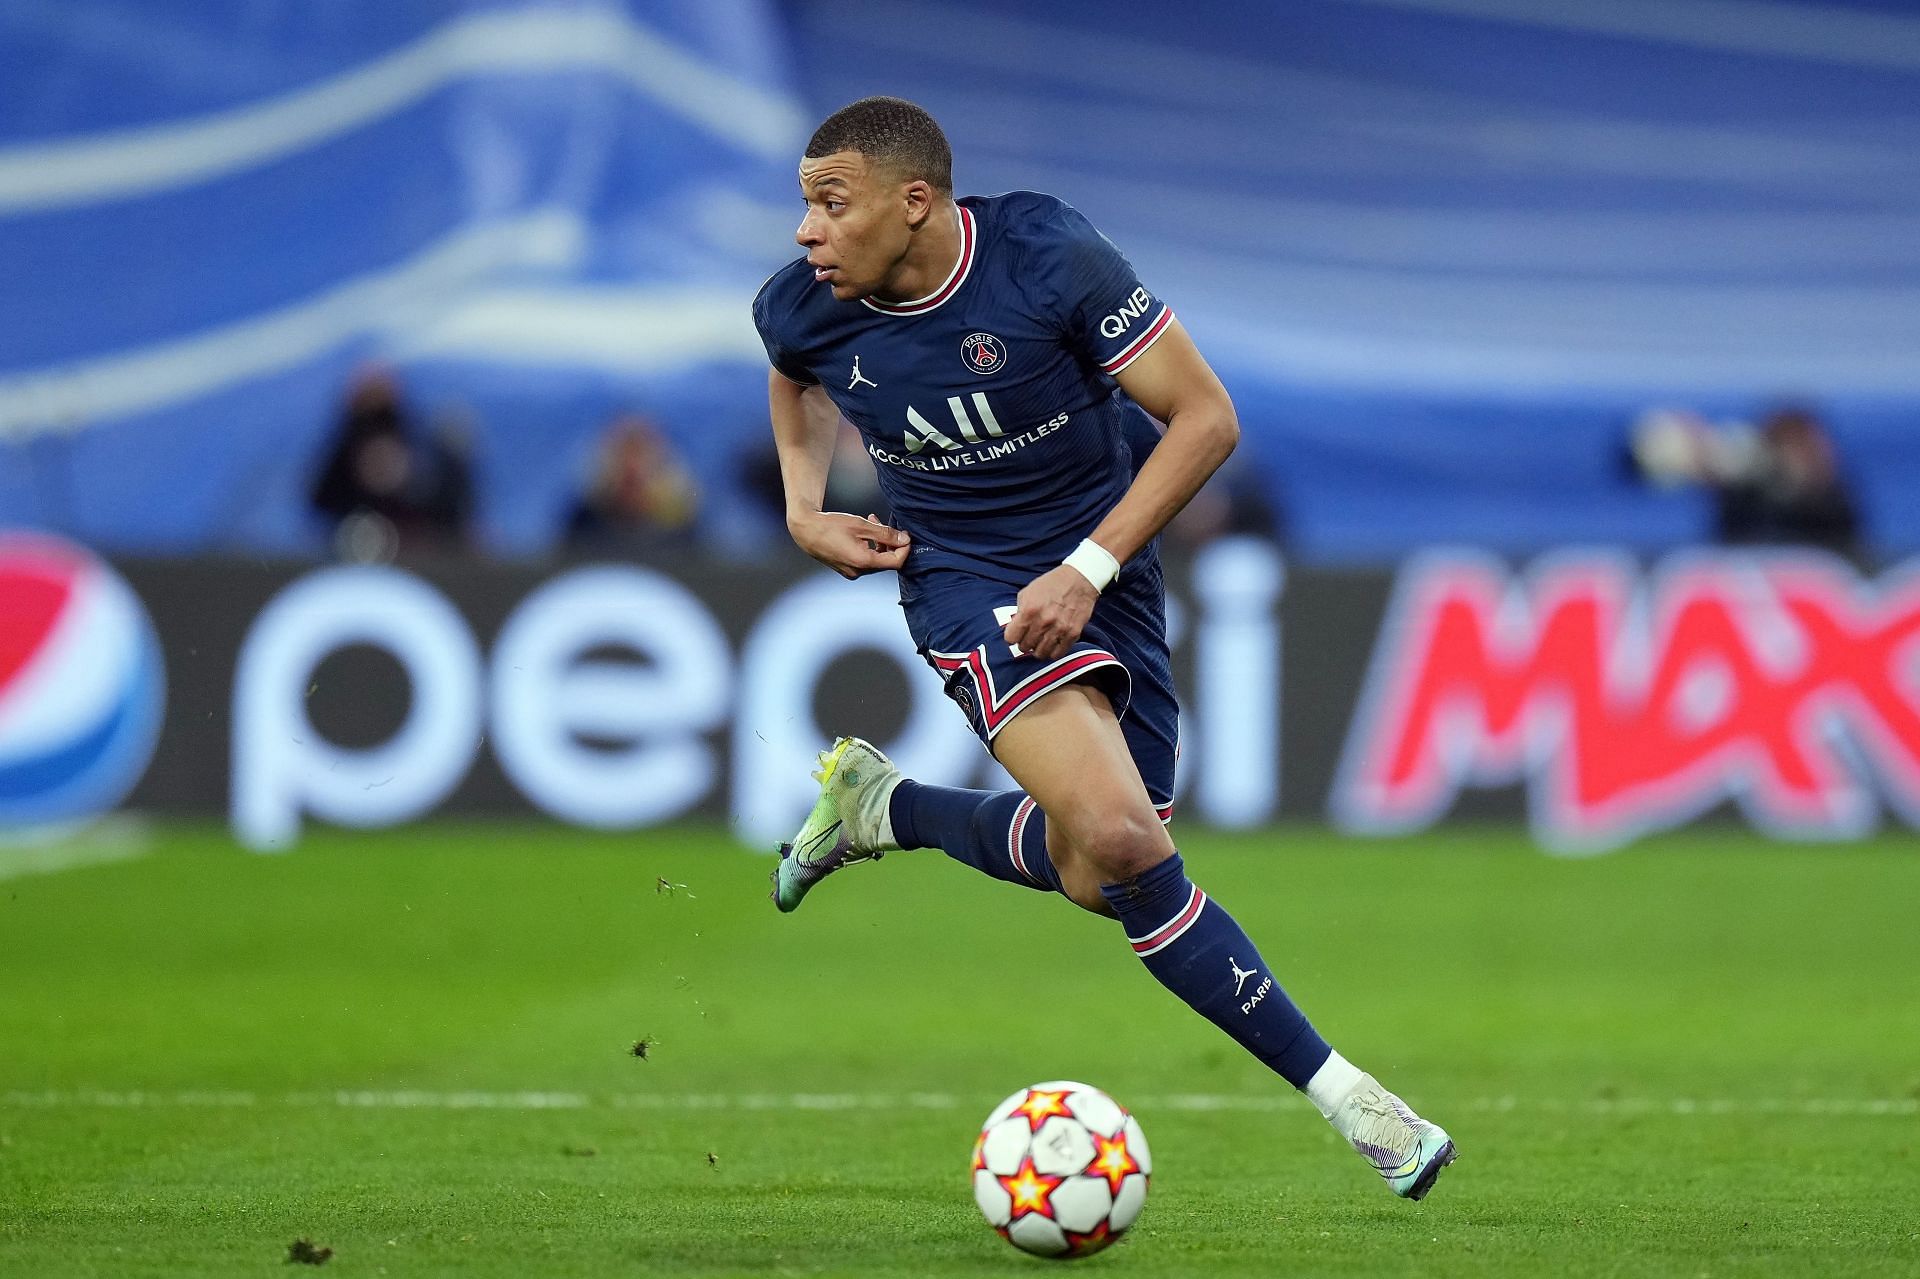 Kylian Mbappe dreams of playing at the Santiago Bernabeu.